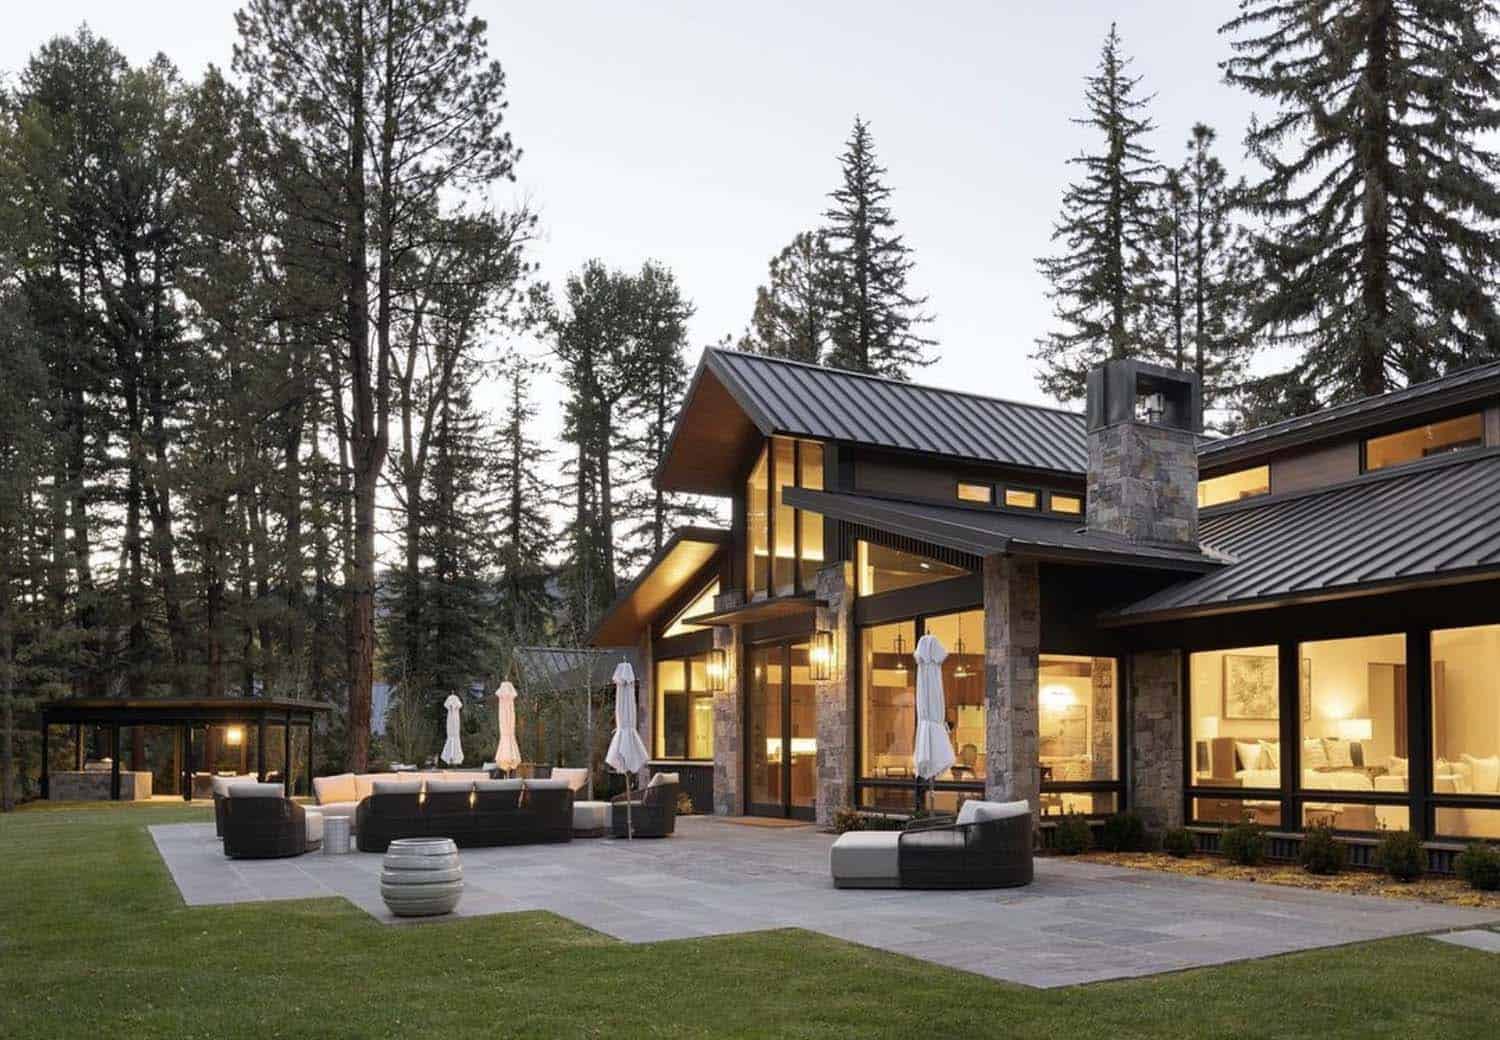 modern rustic mountain home exterior with a patio at dusk